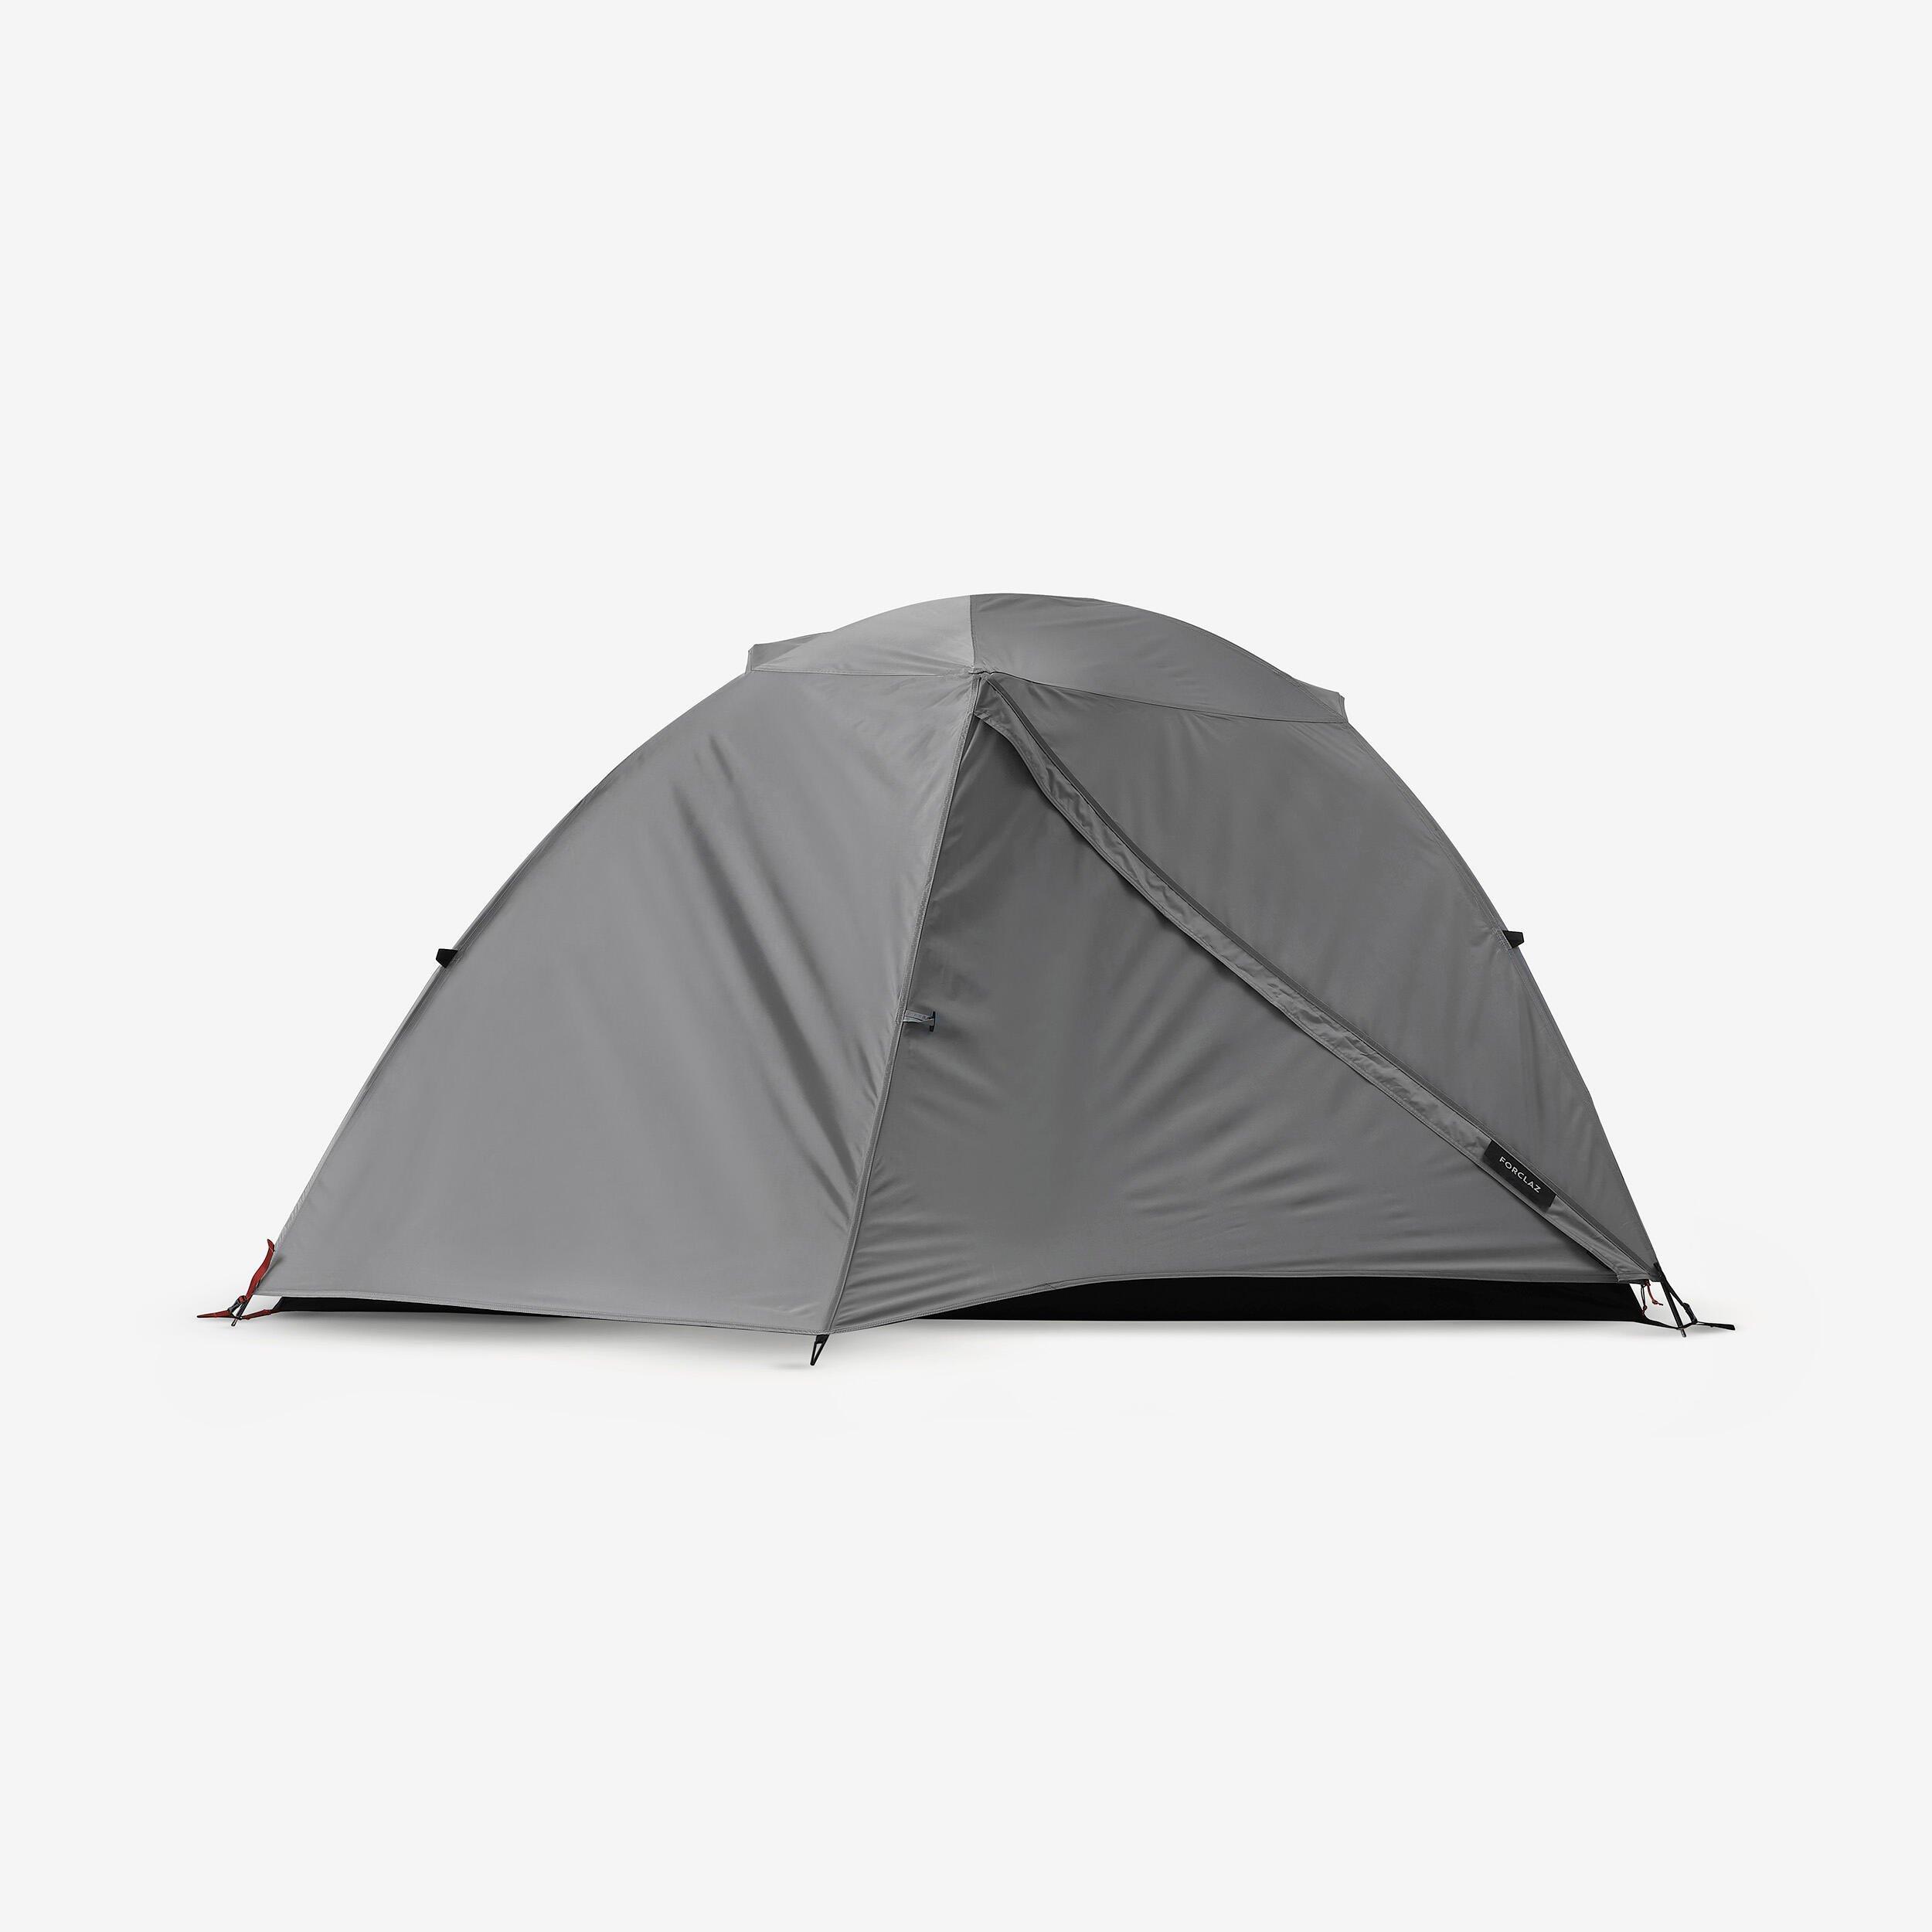 2 Person Dome Trekking Tent